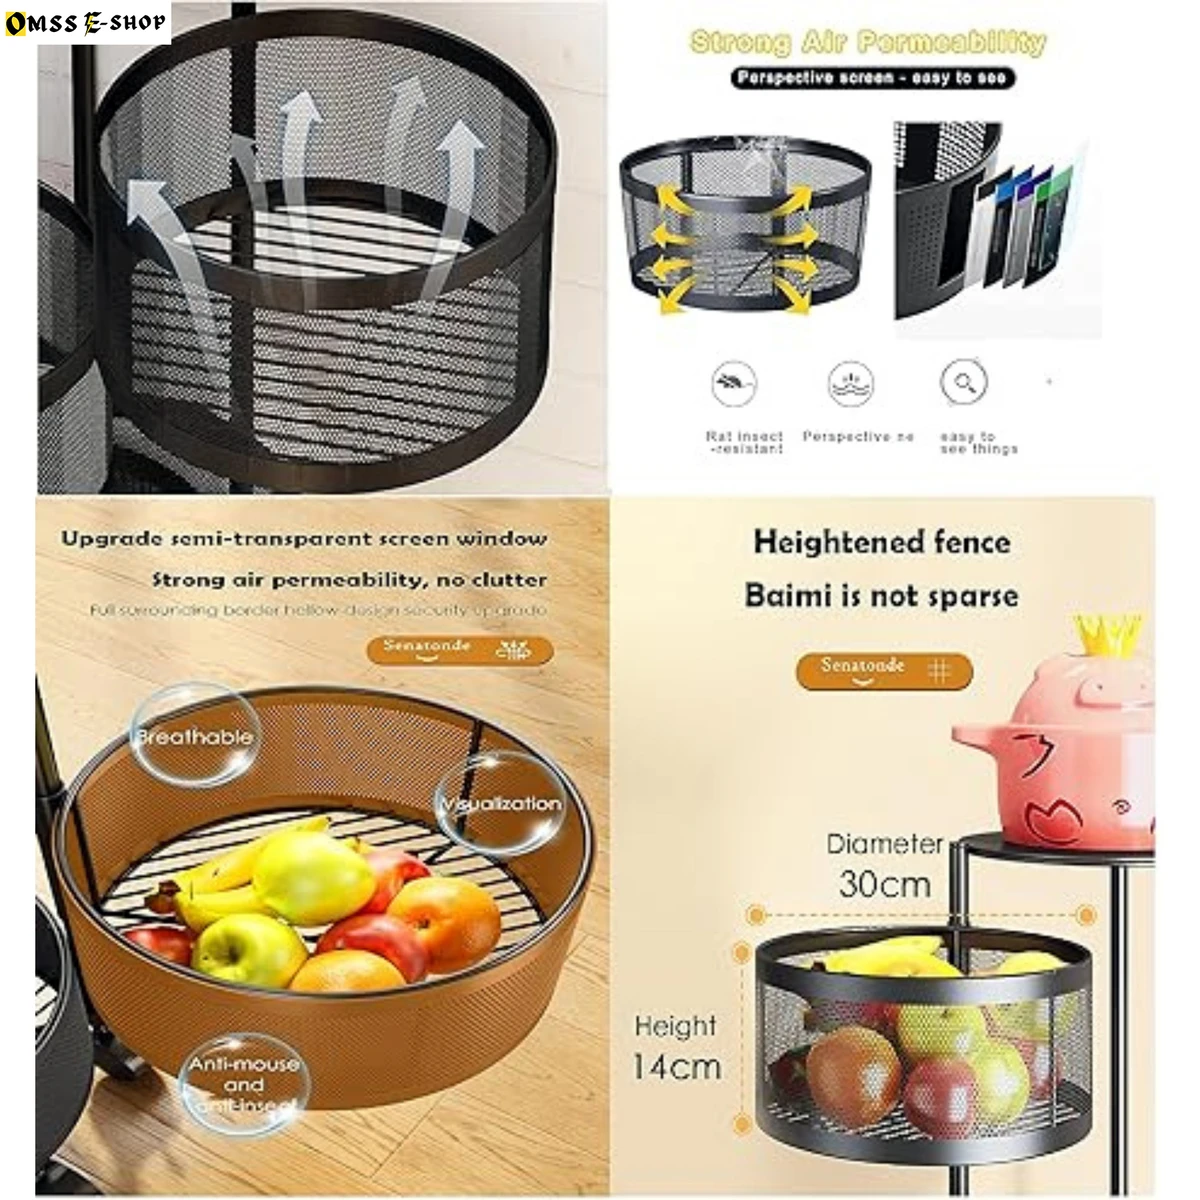 Home Kitchen Cube Round Design Metal Frame 5 Layer Portable And Rotating Storage Trolley Rack Fruits and Vegetable Onion Cutlery, Spice, Jars Container, Basket Organizer Holder Stand for Kitchen - Black Color